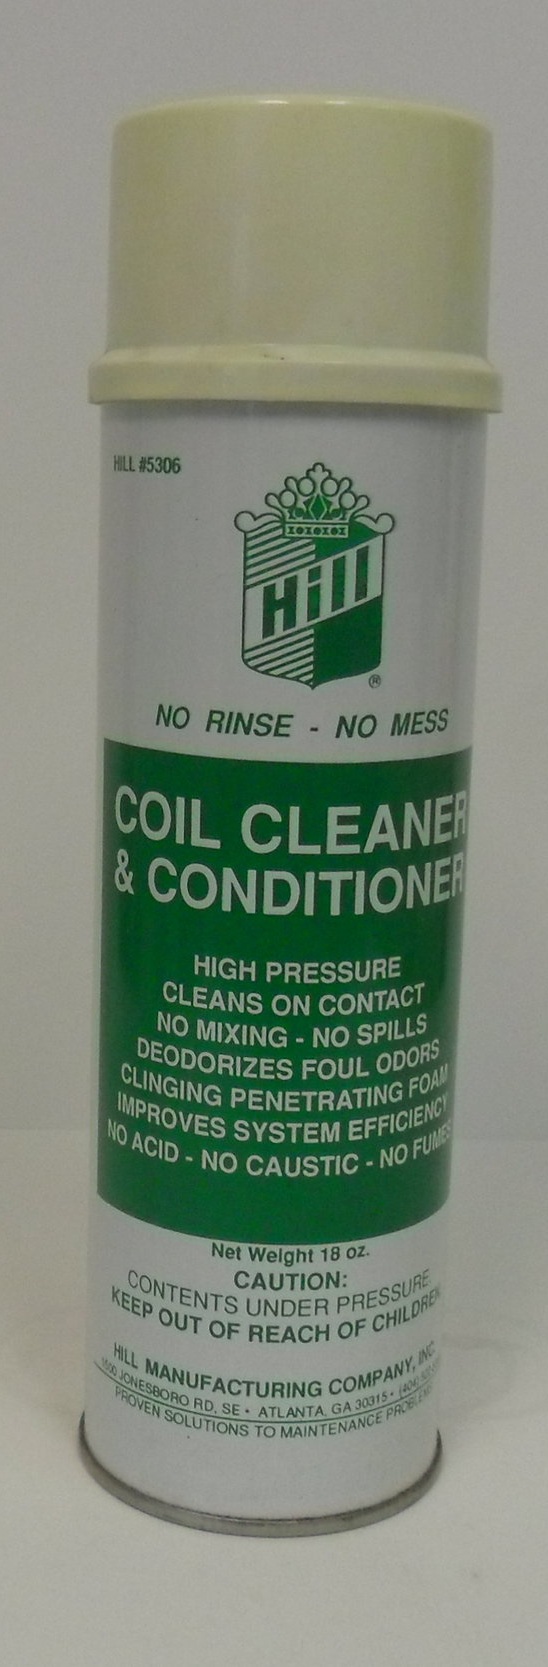 AC Coil Cleaner and Conditioner